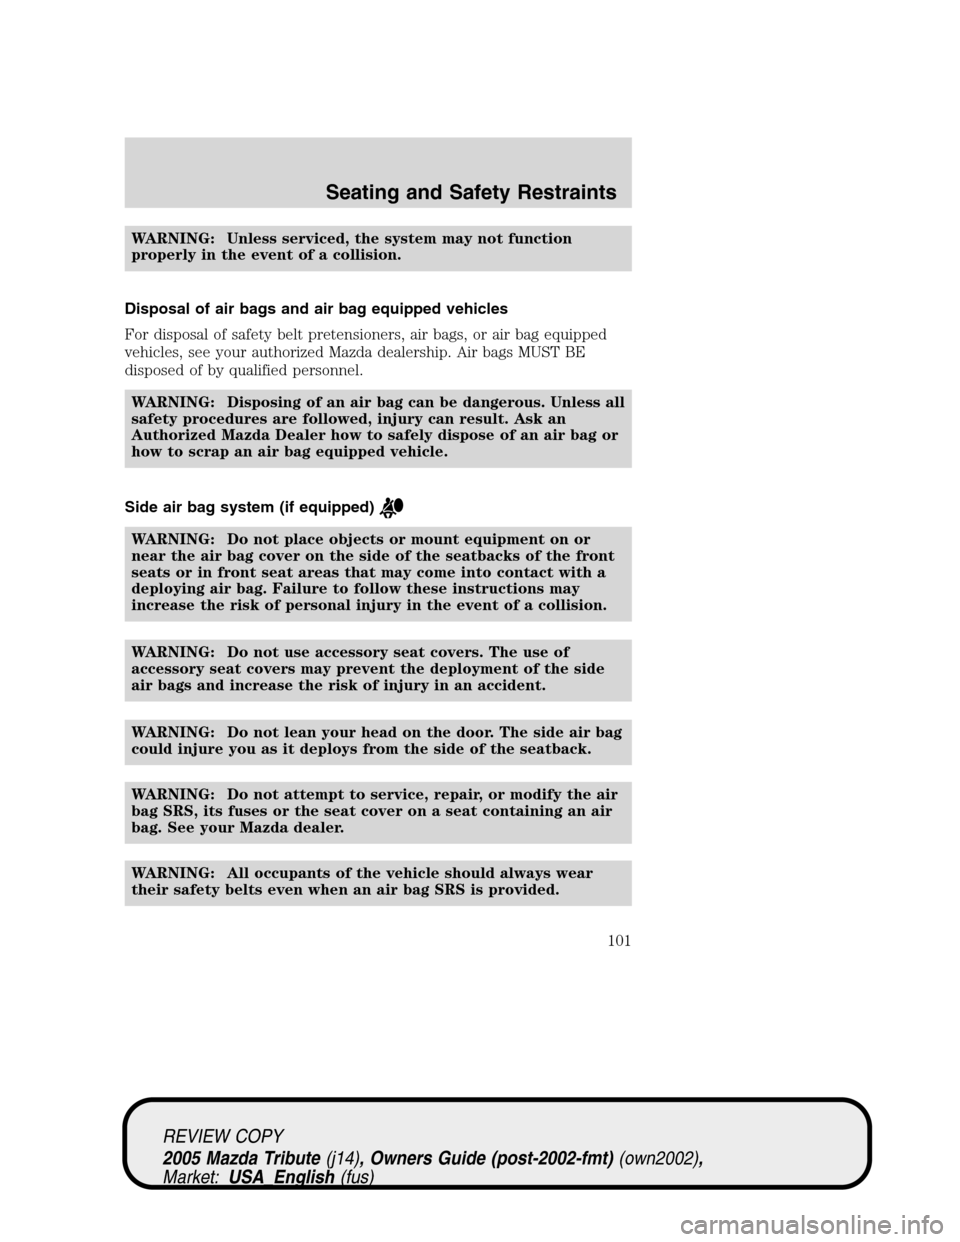 MAZDA MODEL TRIBUTE 2005  Owners Manual (in English) WARNING: Unless serviced, the system may not function
properly in the event of a collision.
Disposal of air bags and air bag equipped vehicles
For disposal of safety belt pretensioners, air bags, or a